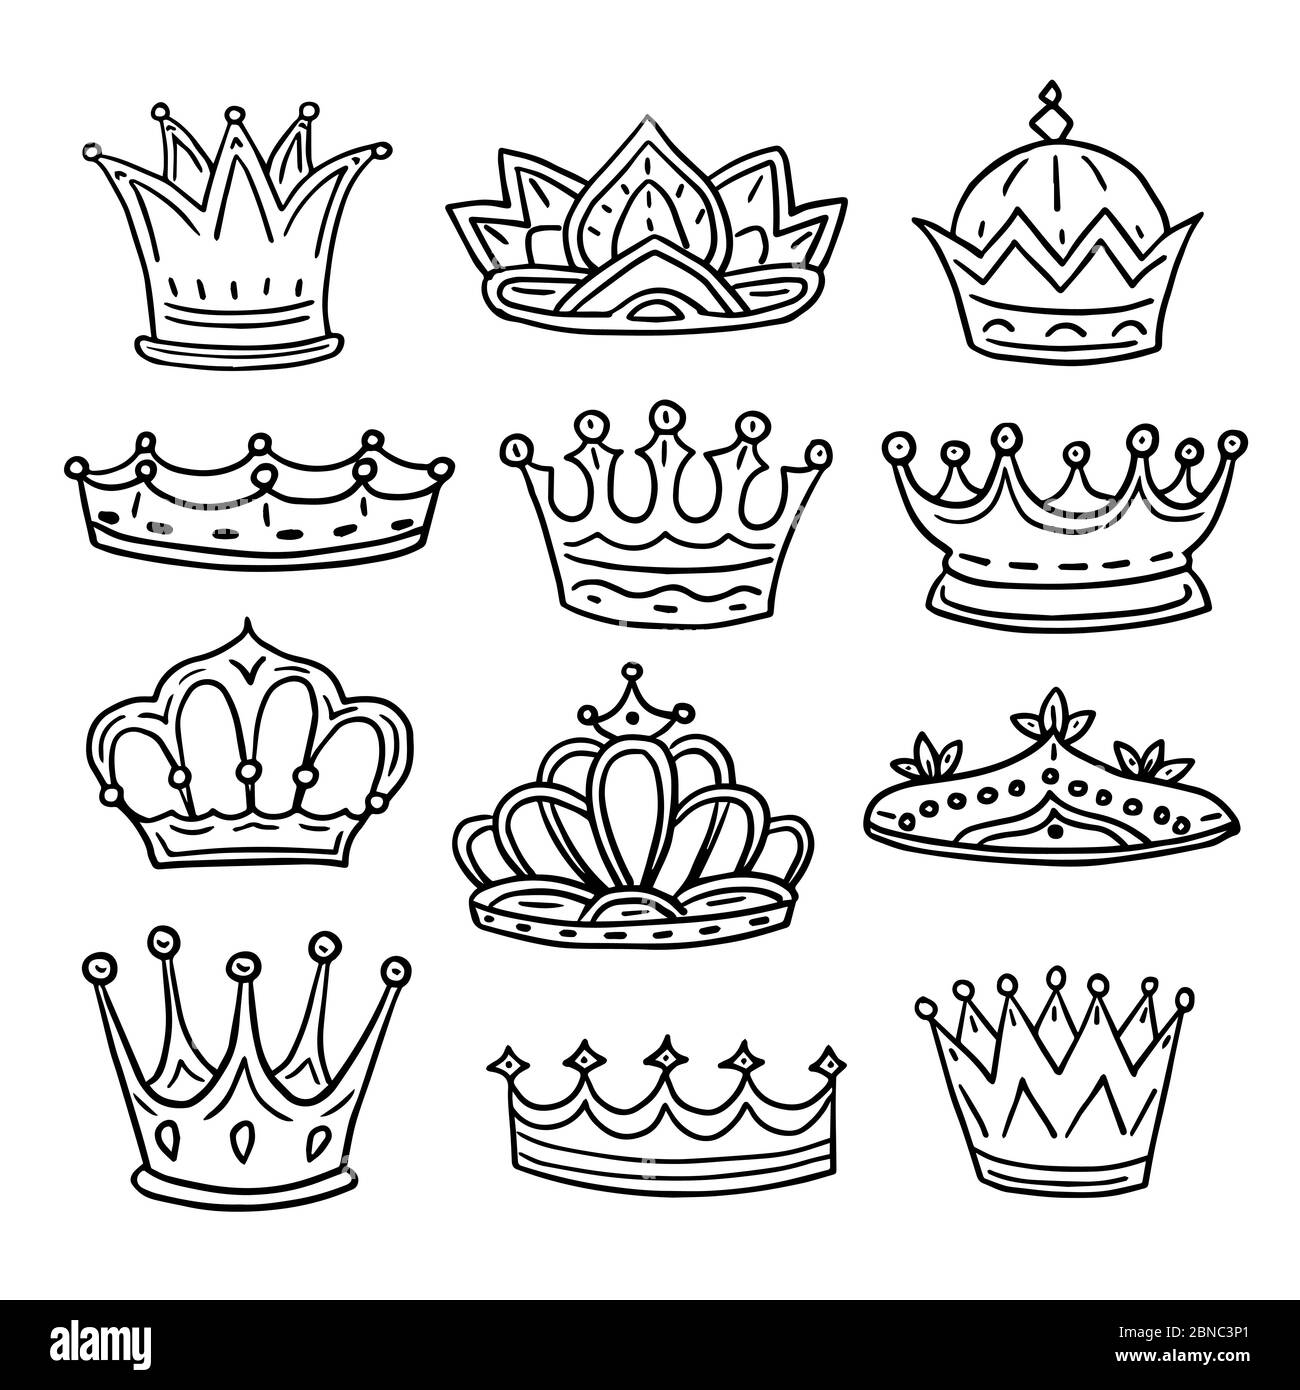 Sketch Crowns Hand Drawn King Queen Crown and Princess Tiara Stock Vector   Illustration of fashion graphic 131376543